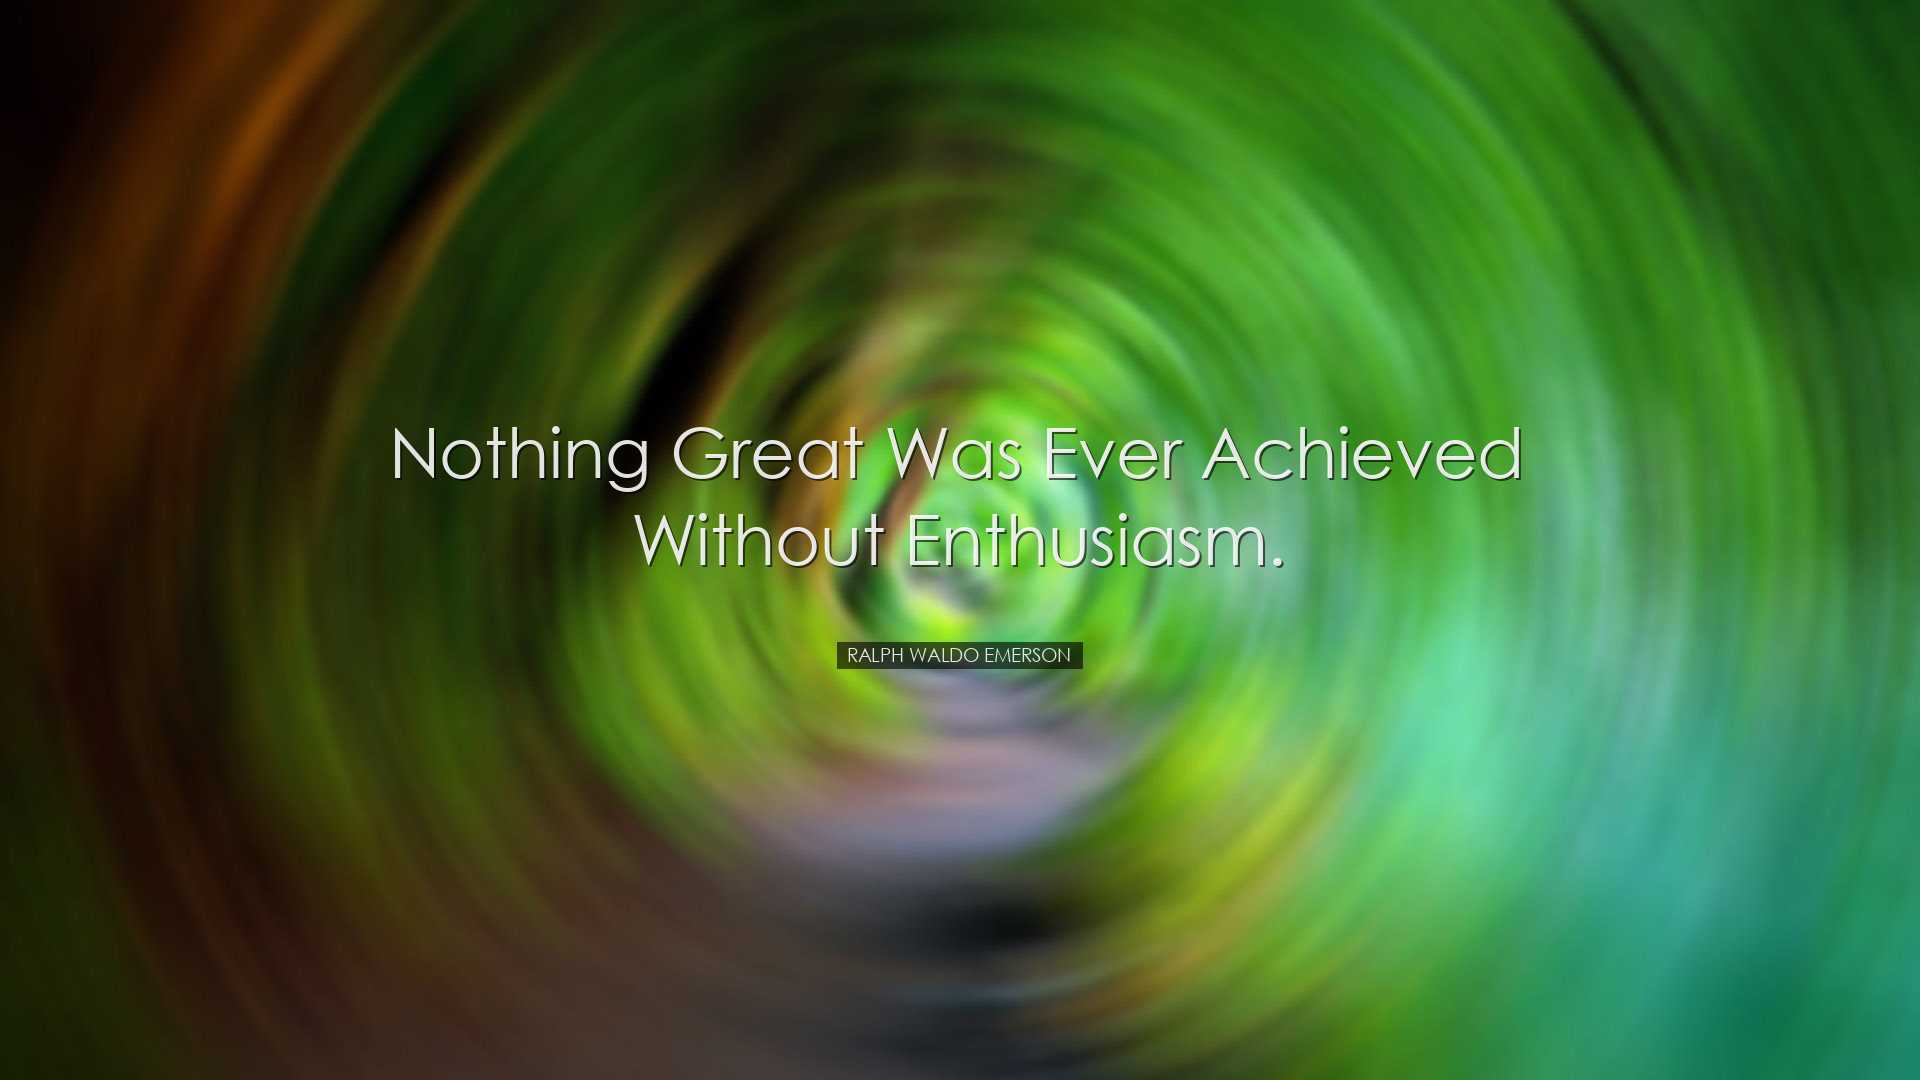 Nothing great was ever achieved without enthusiasm. - Ralph Waldo